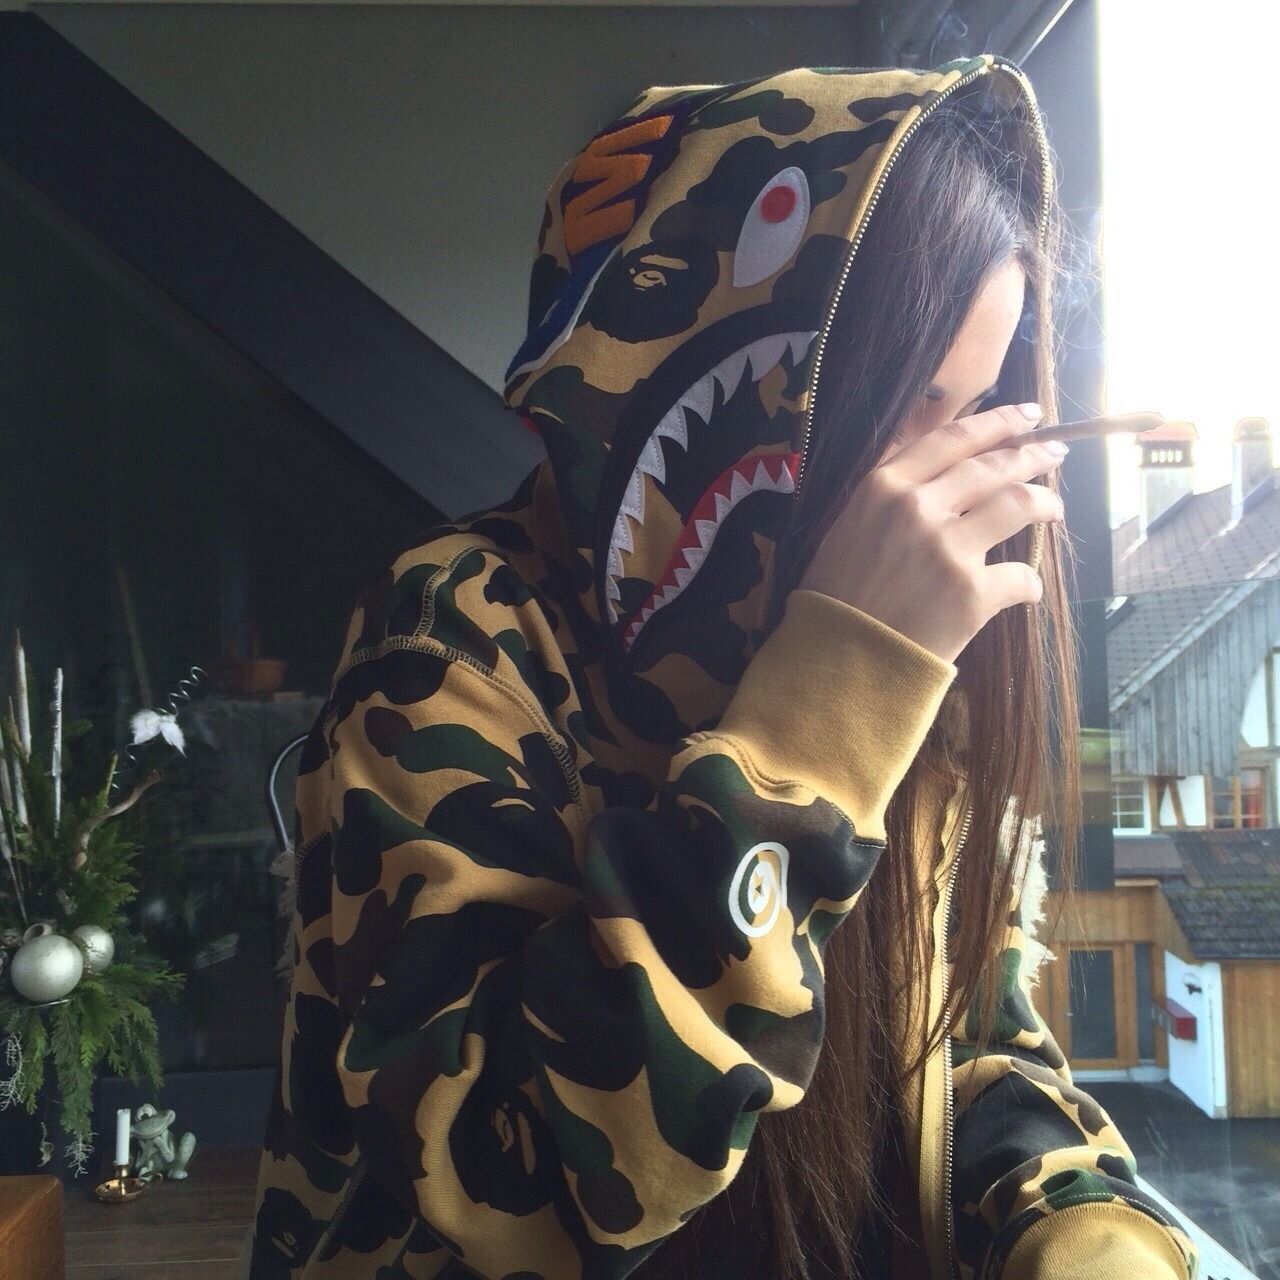 Bape jackets are the perfect way to stay stylish and comfortable